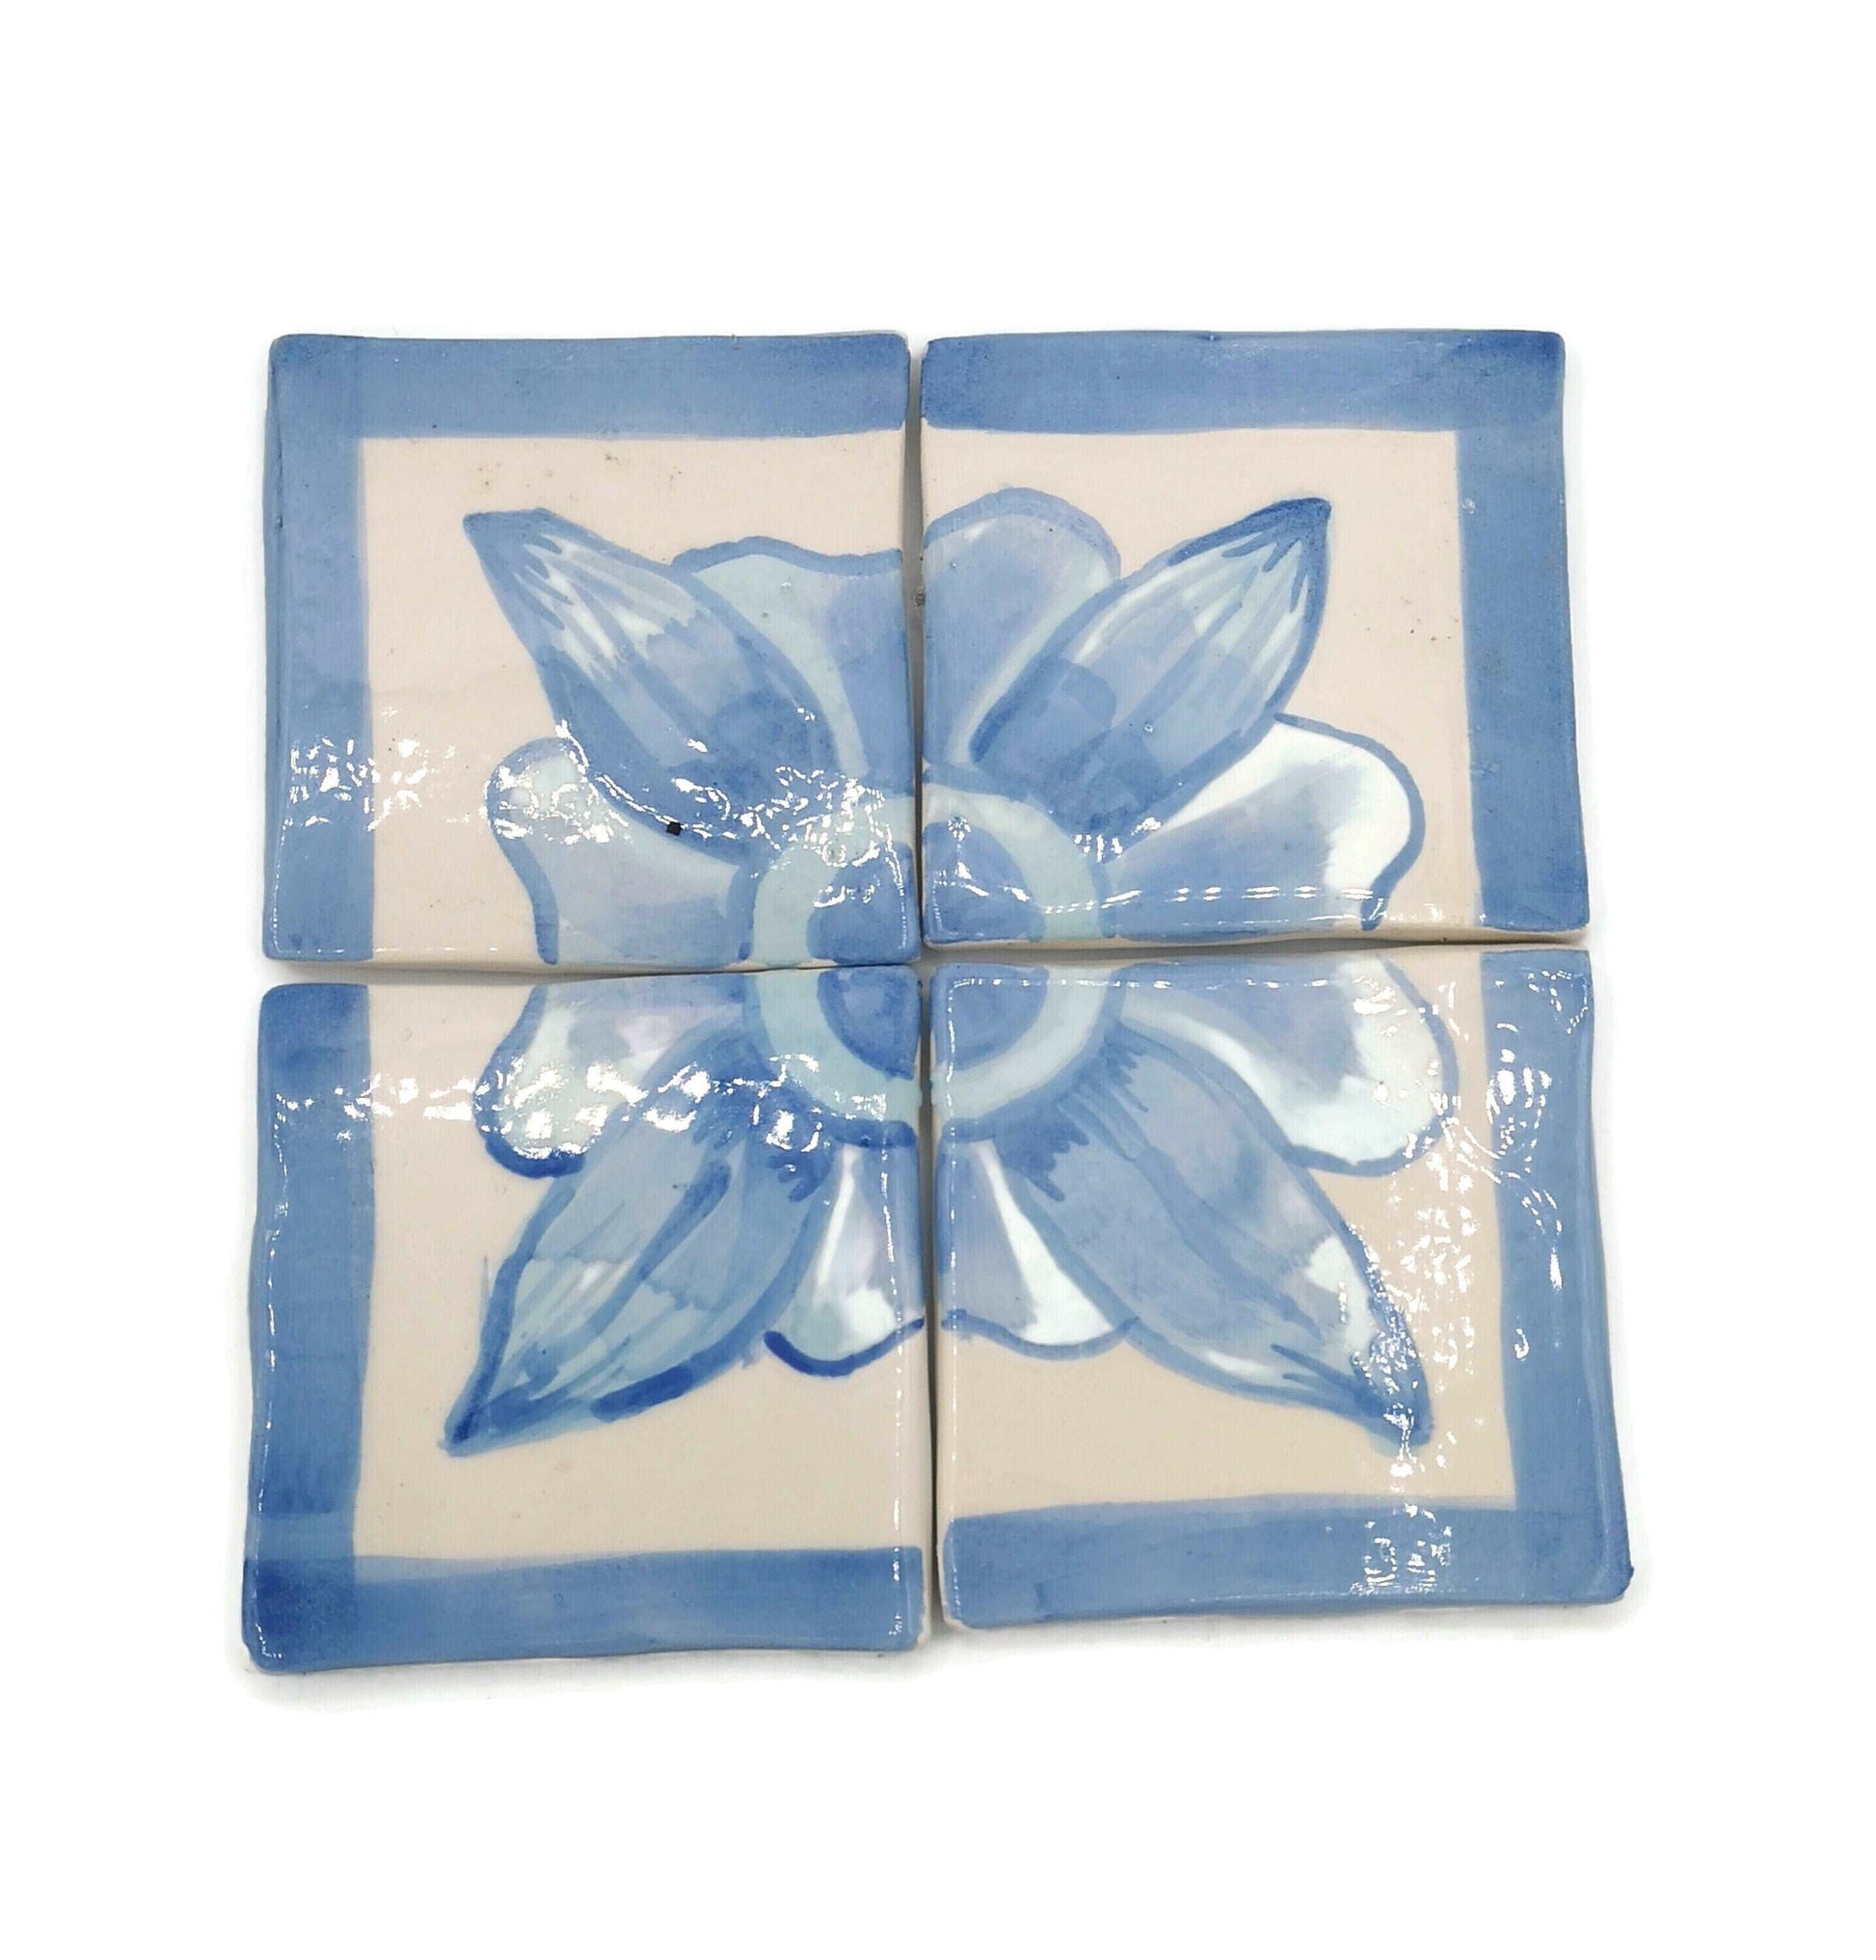 15cm/5.9in Handmade Ceramic Blue And White Tile Panel With Hand Painted Floral Motif, Square Mosaic Panel Kitchen Backsplash Portuguese Tile